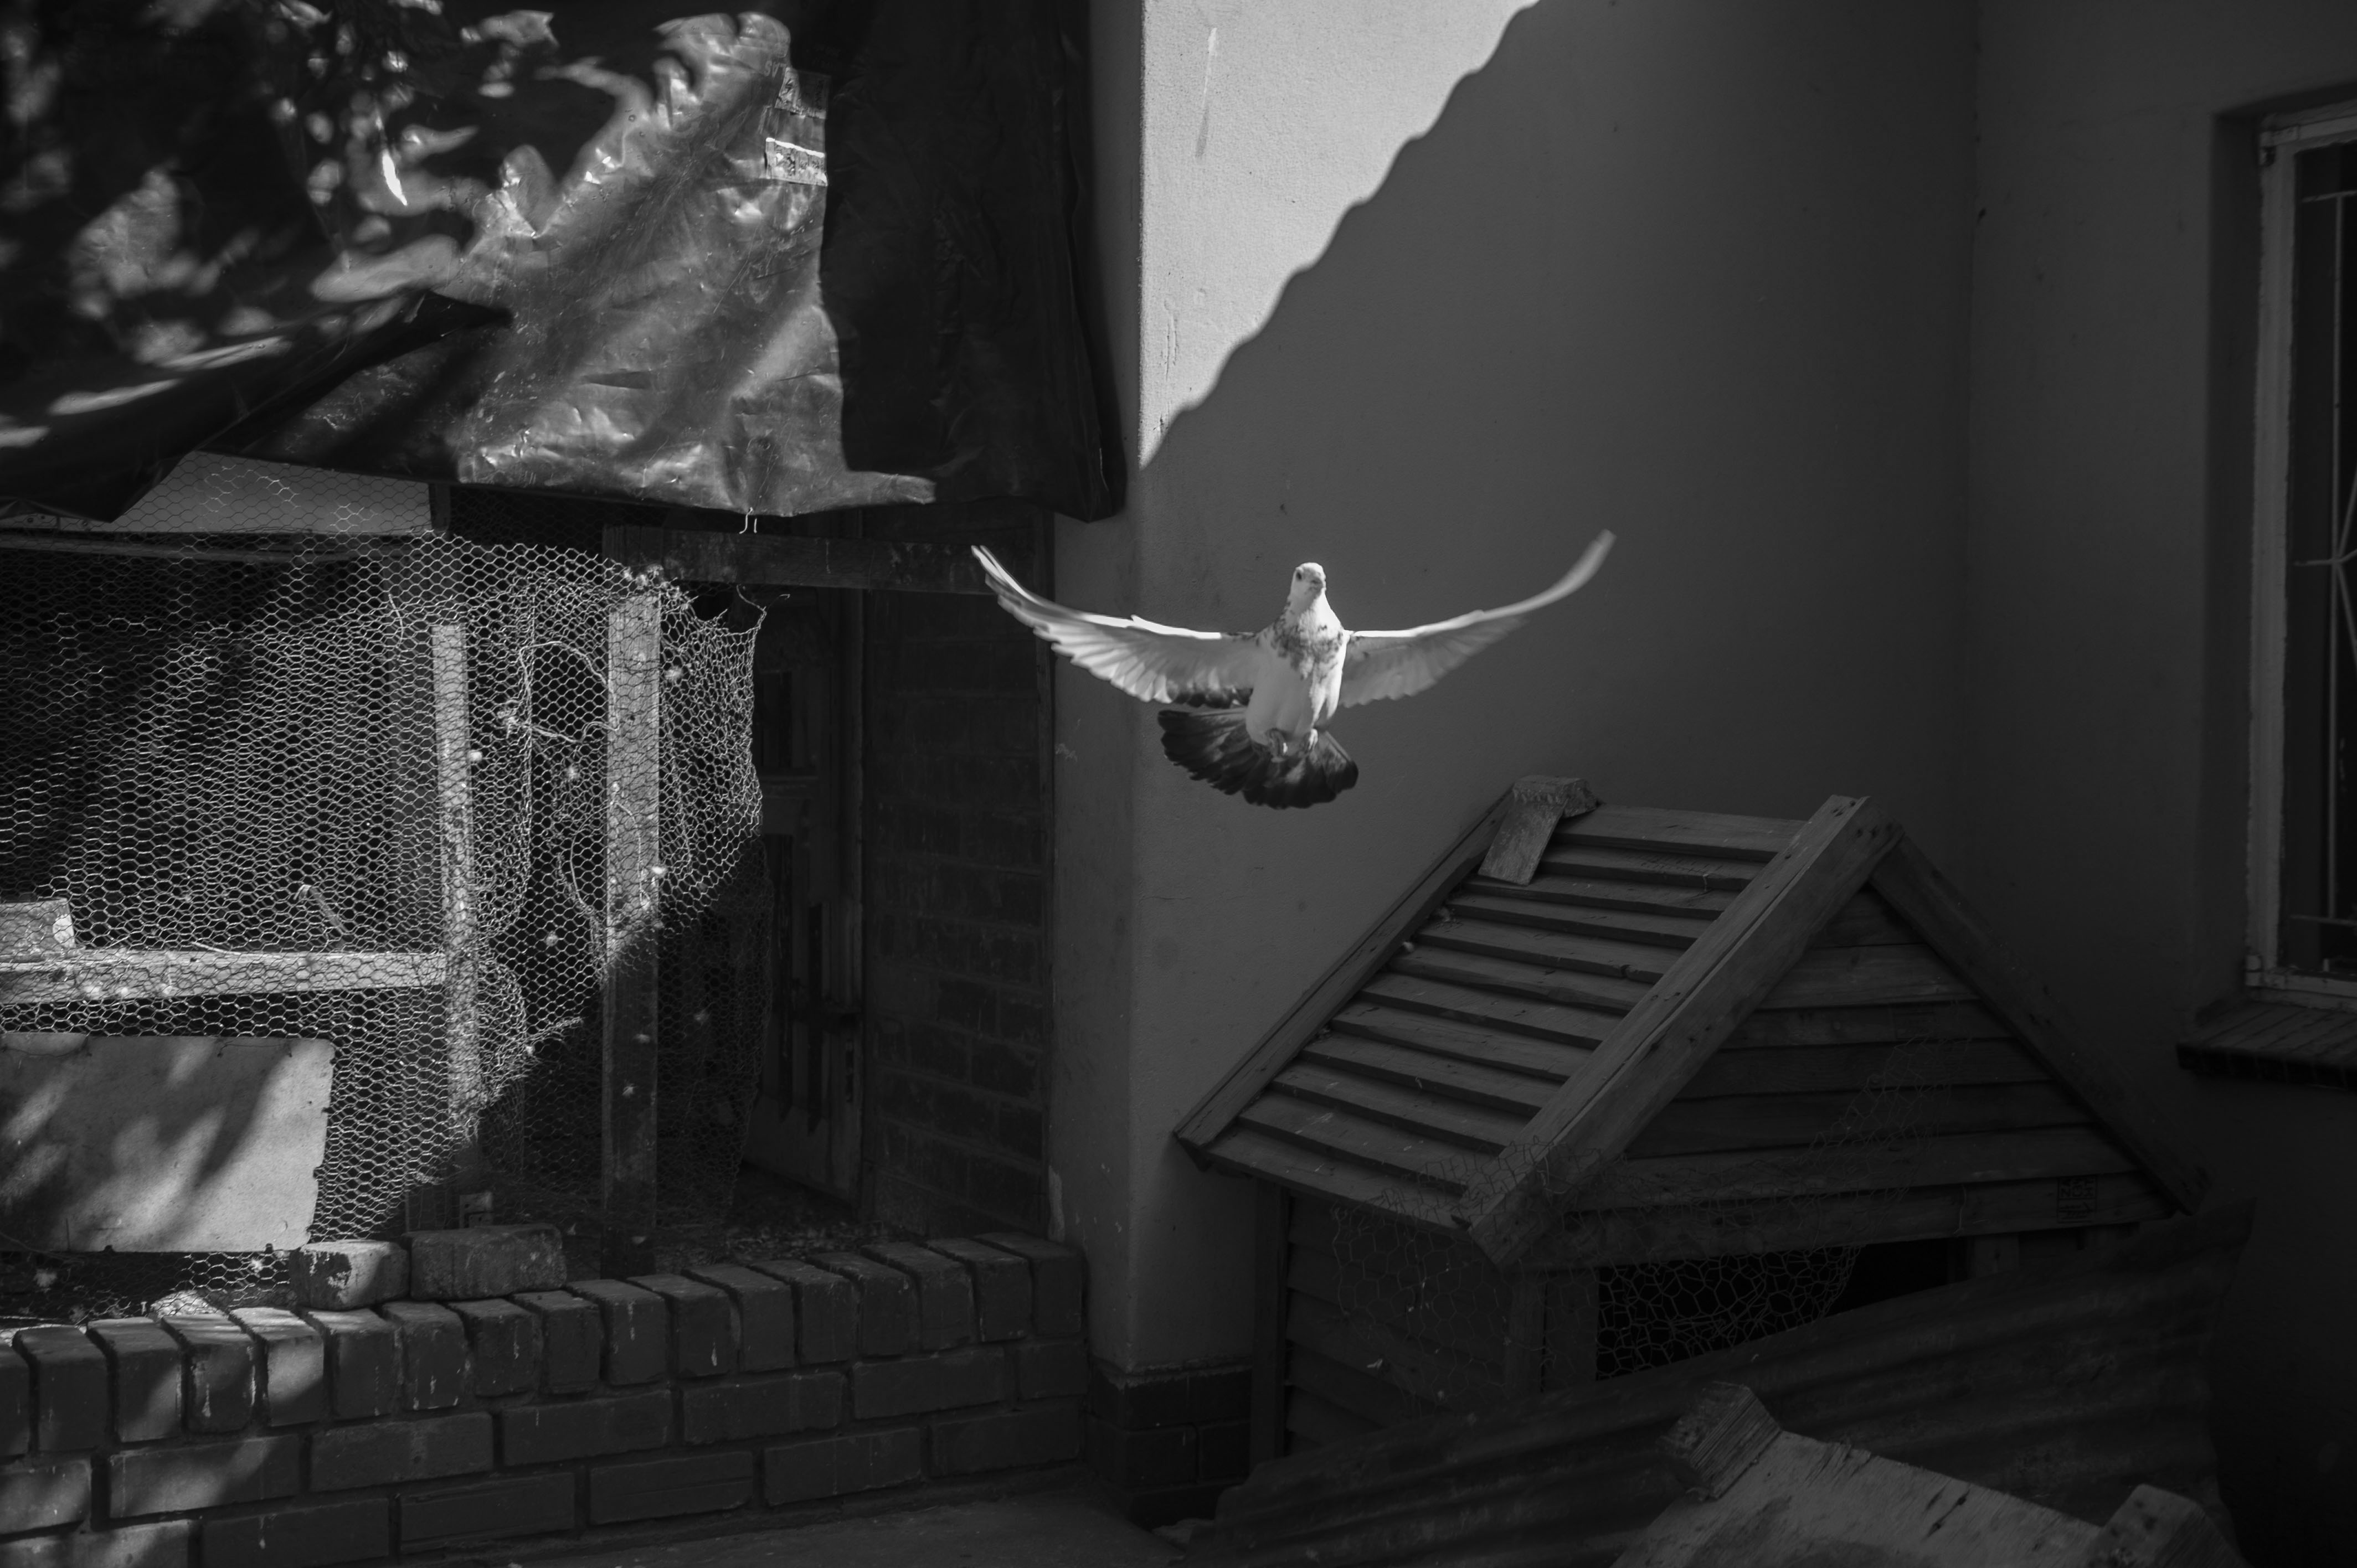 A pigeon owned by Tatenda Gwaze flies out of its loft.